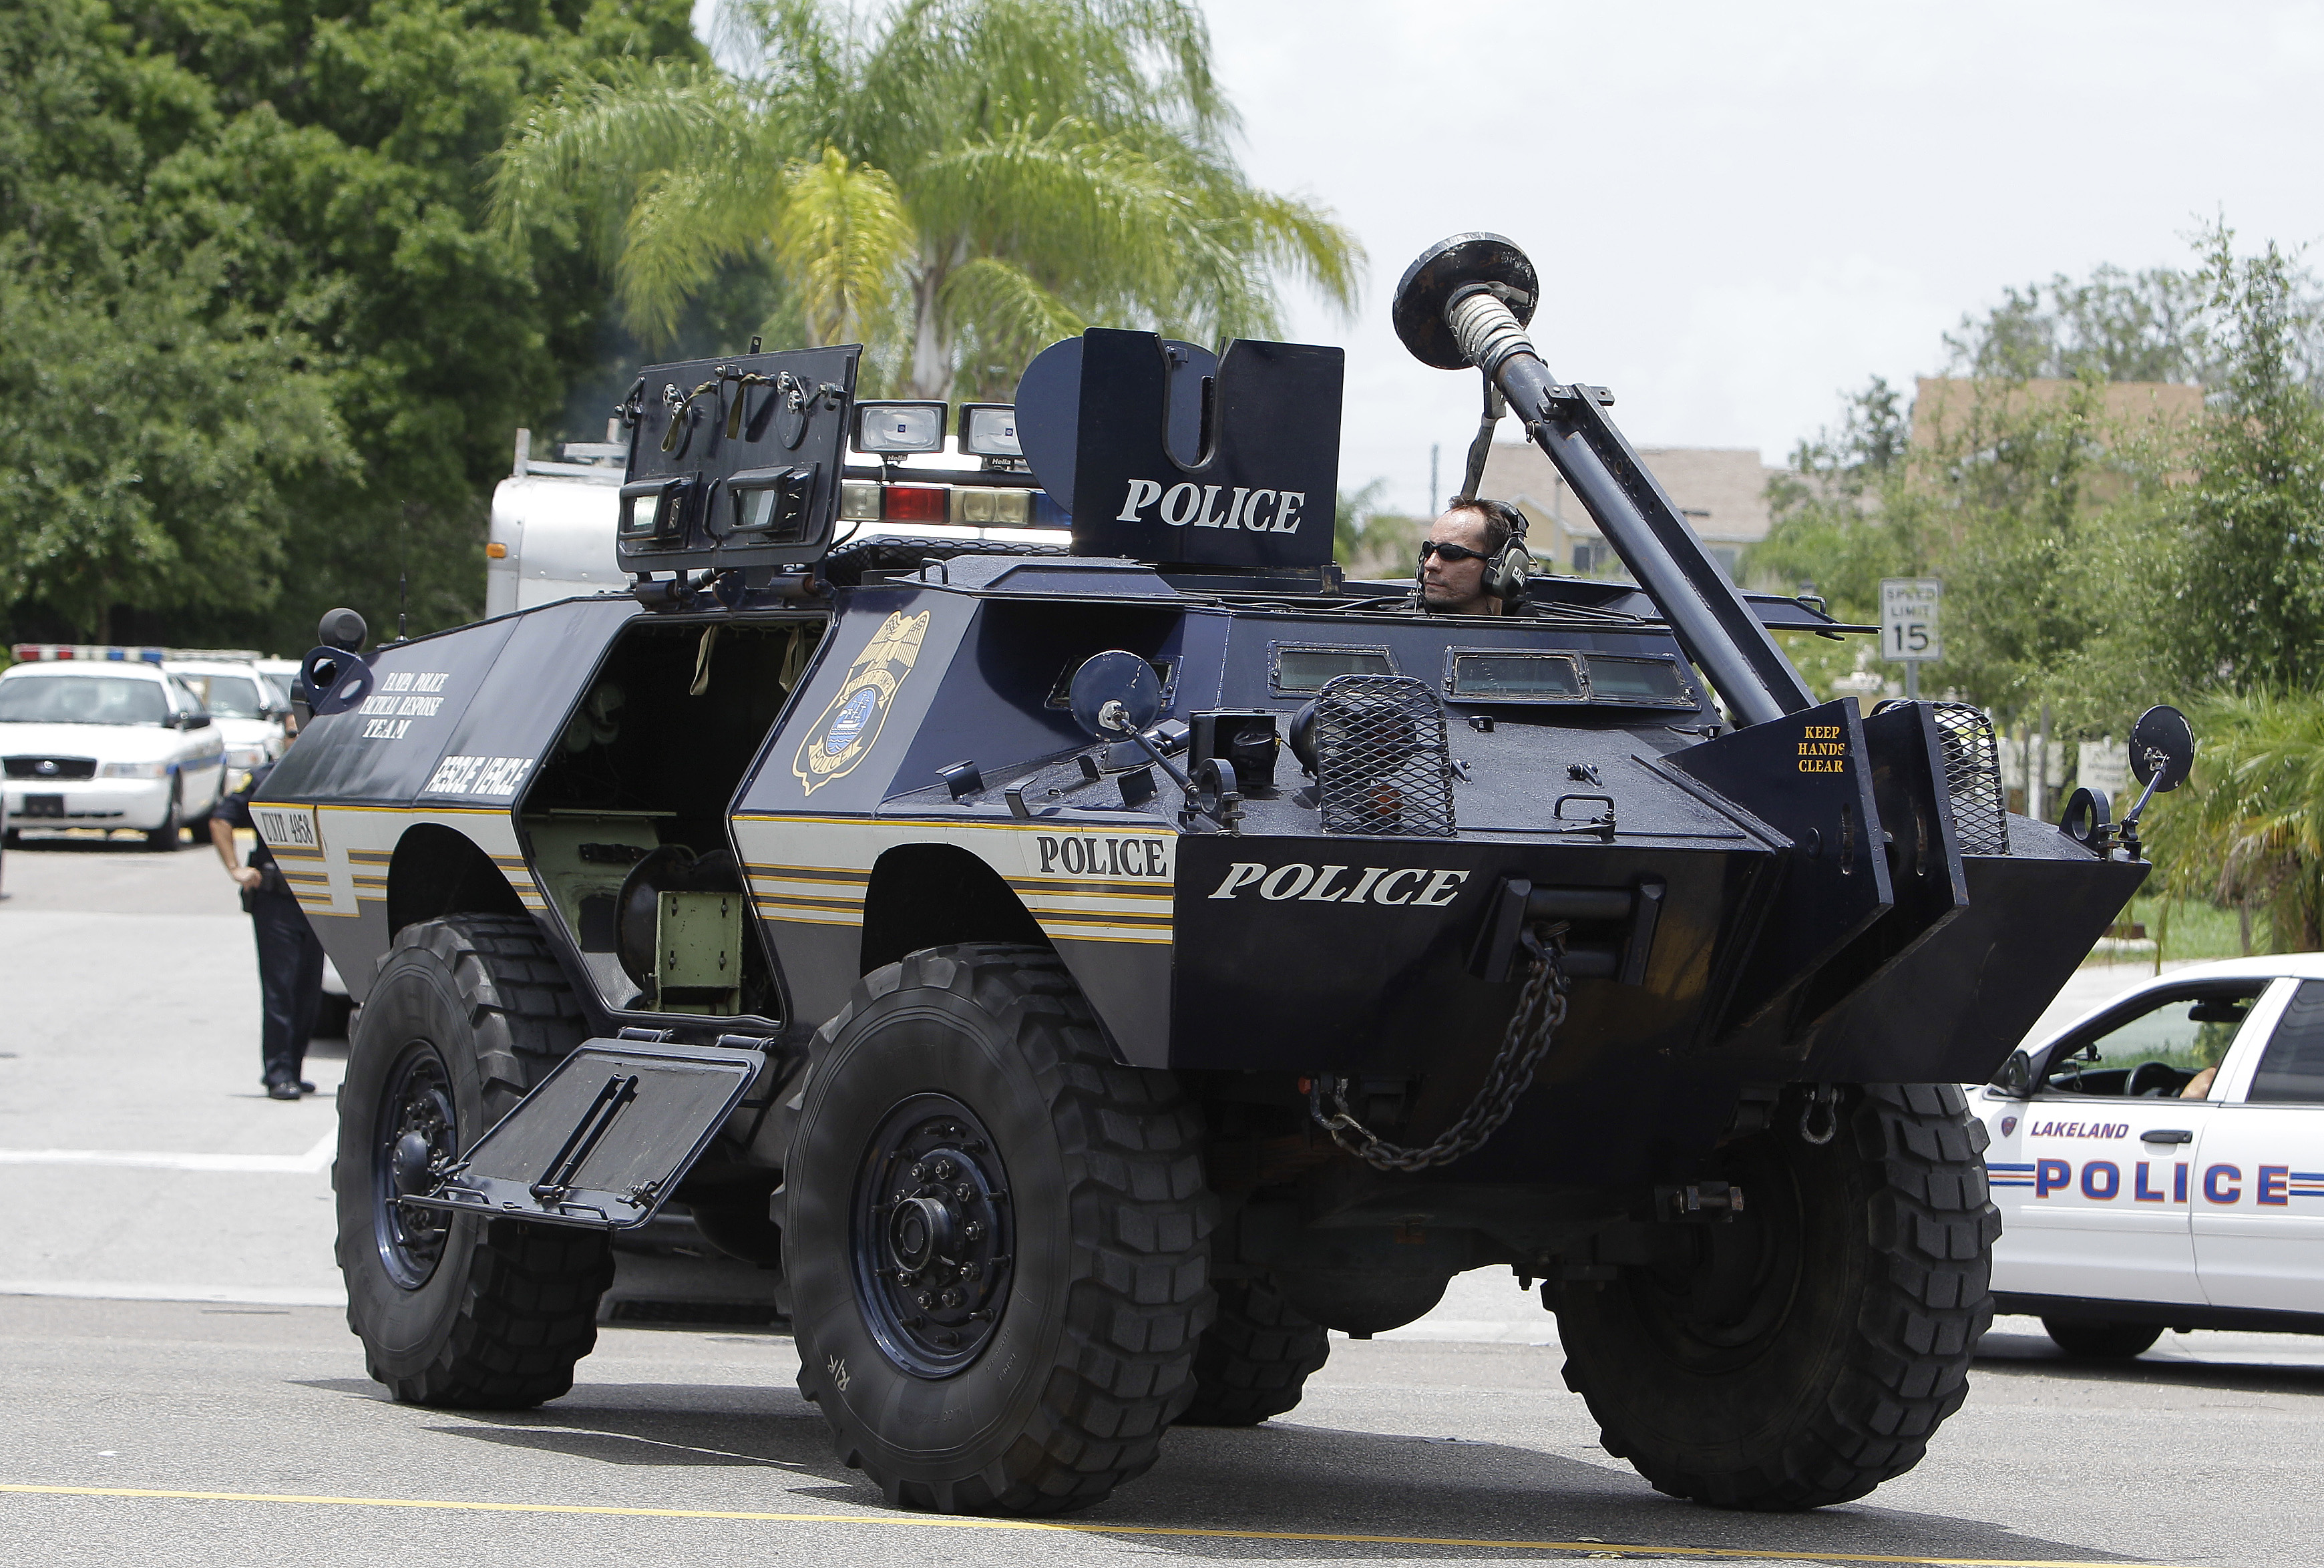 vehicles, police, armored personnel carrier, cadillac gage, military